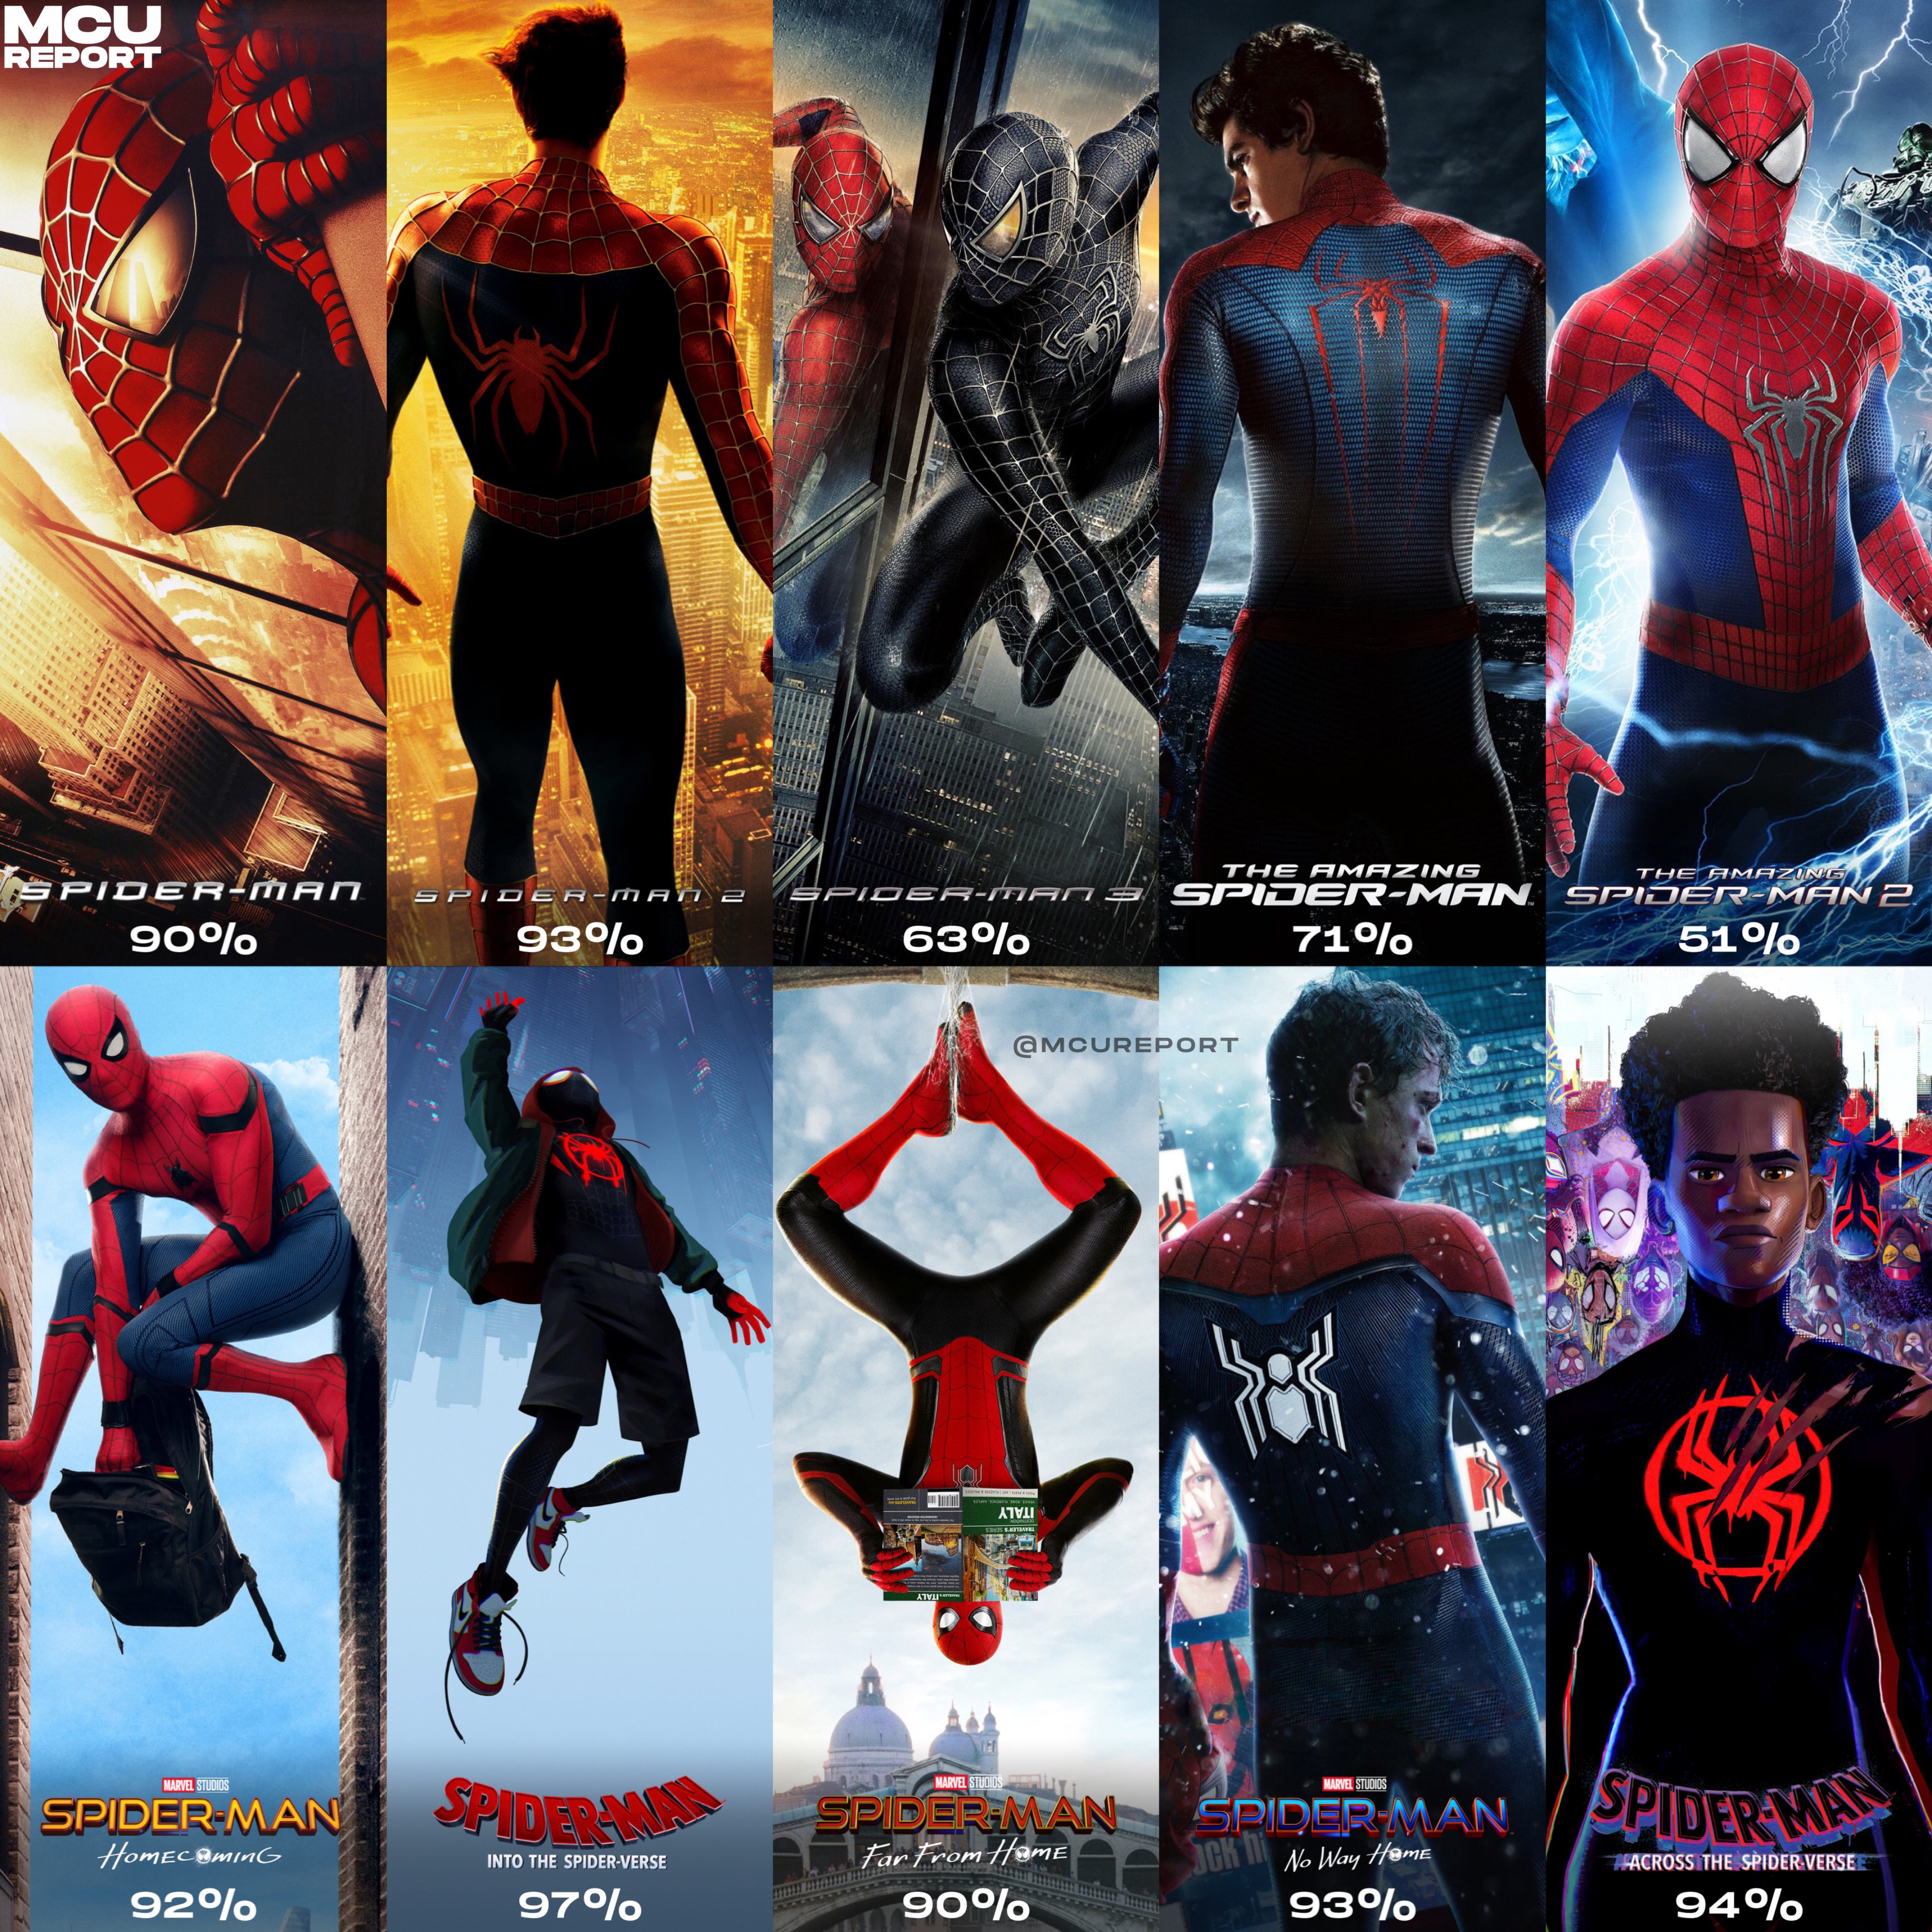 All Spider-Man movies scores on rotten tomatoes.Do you think these